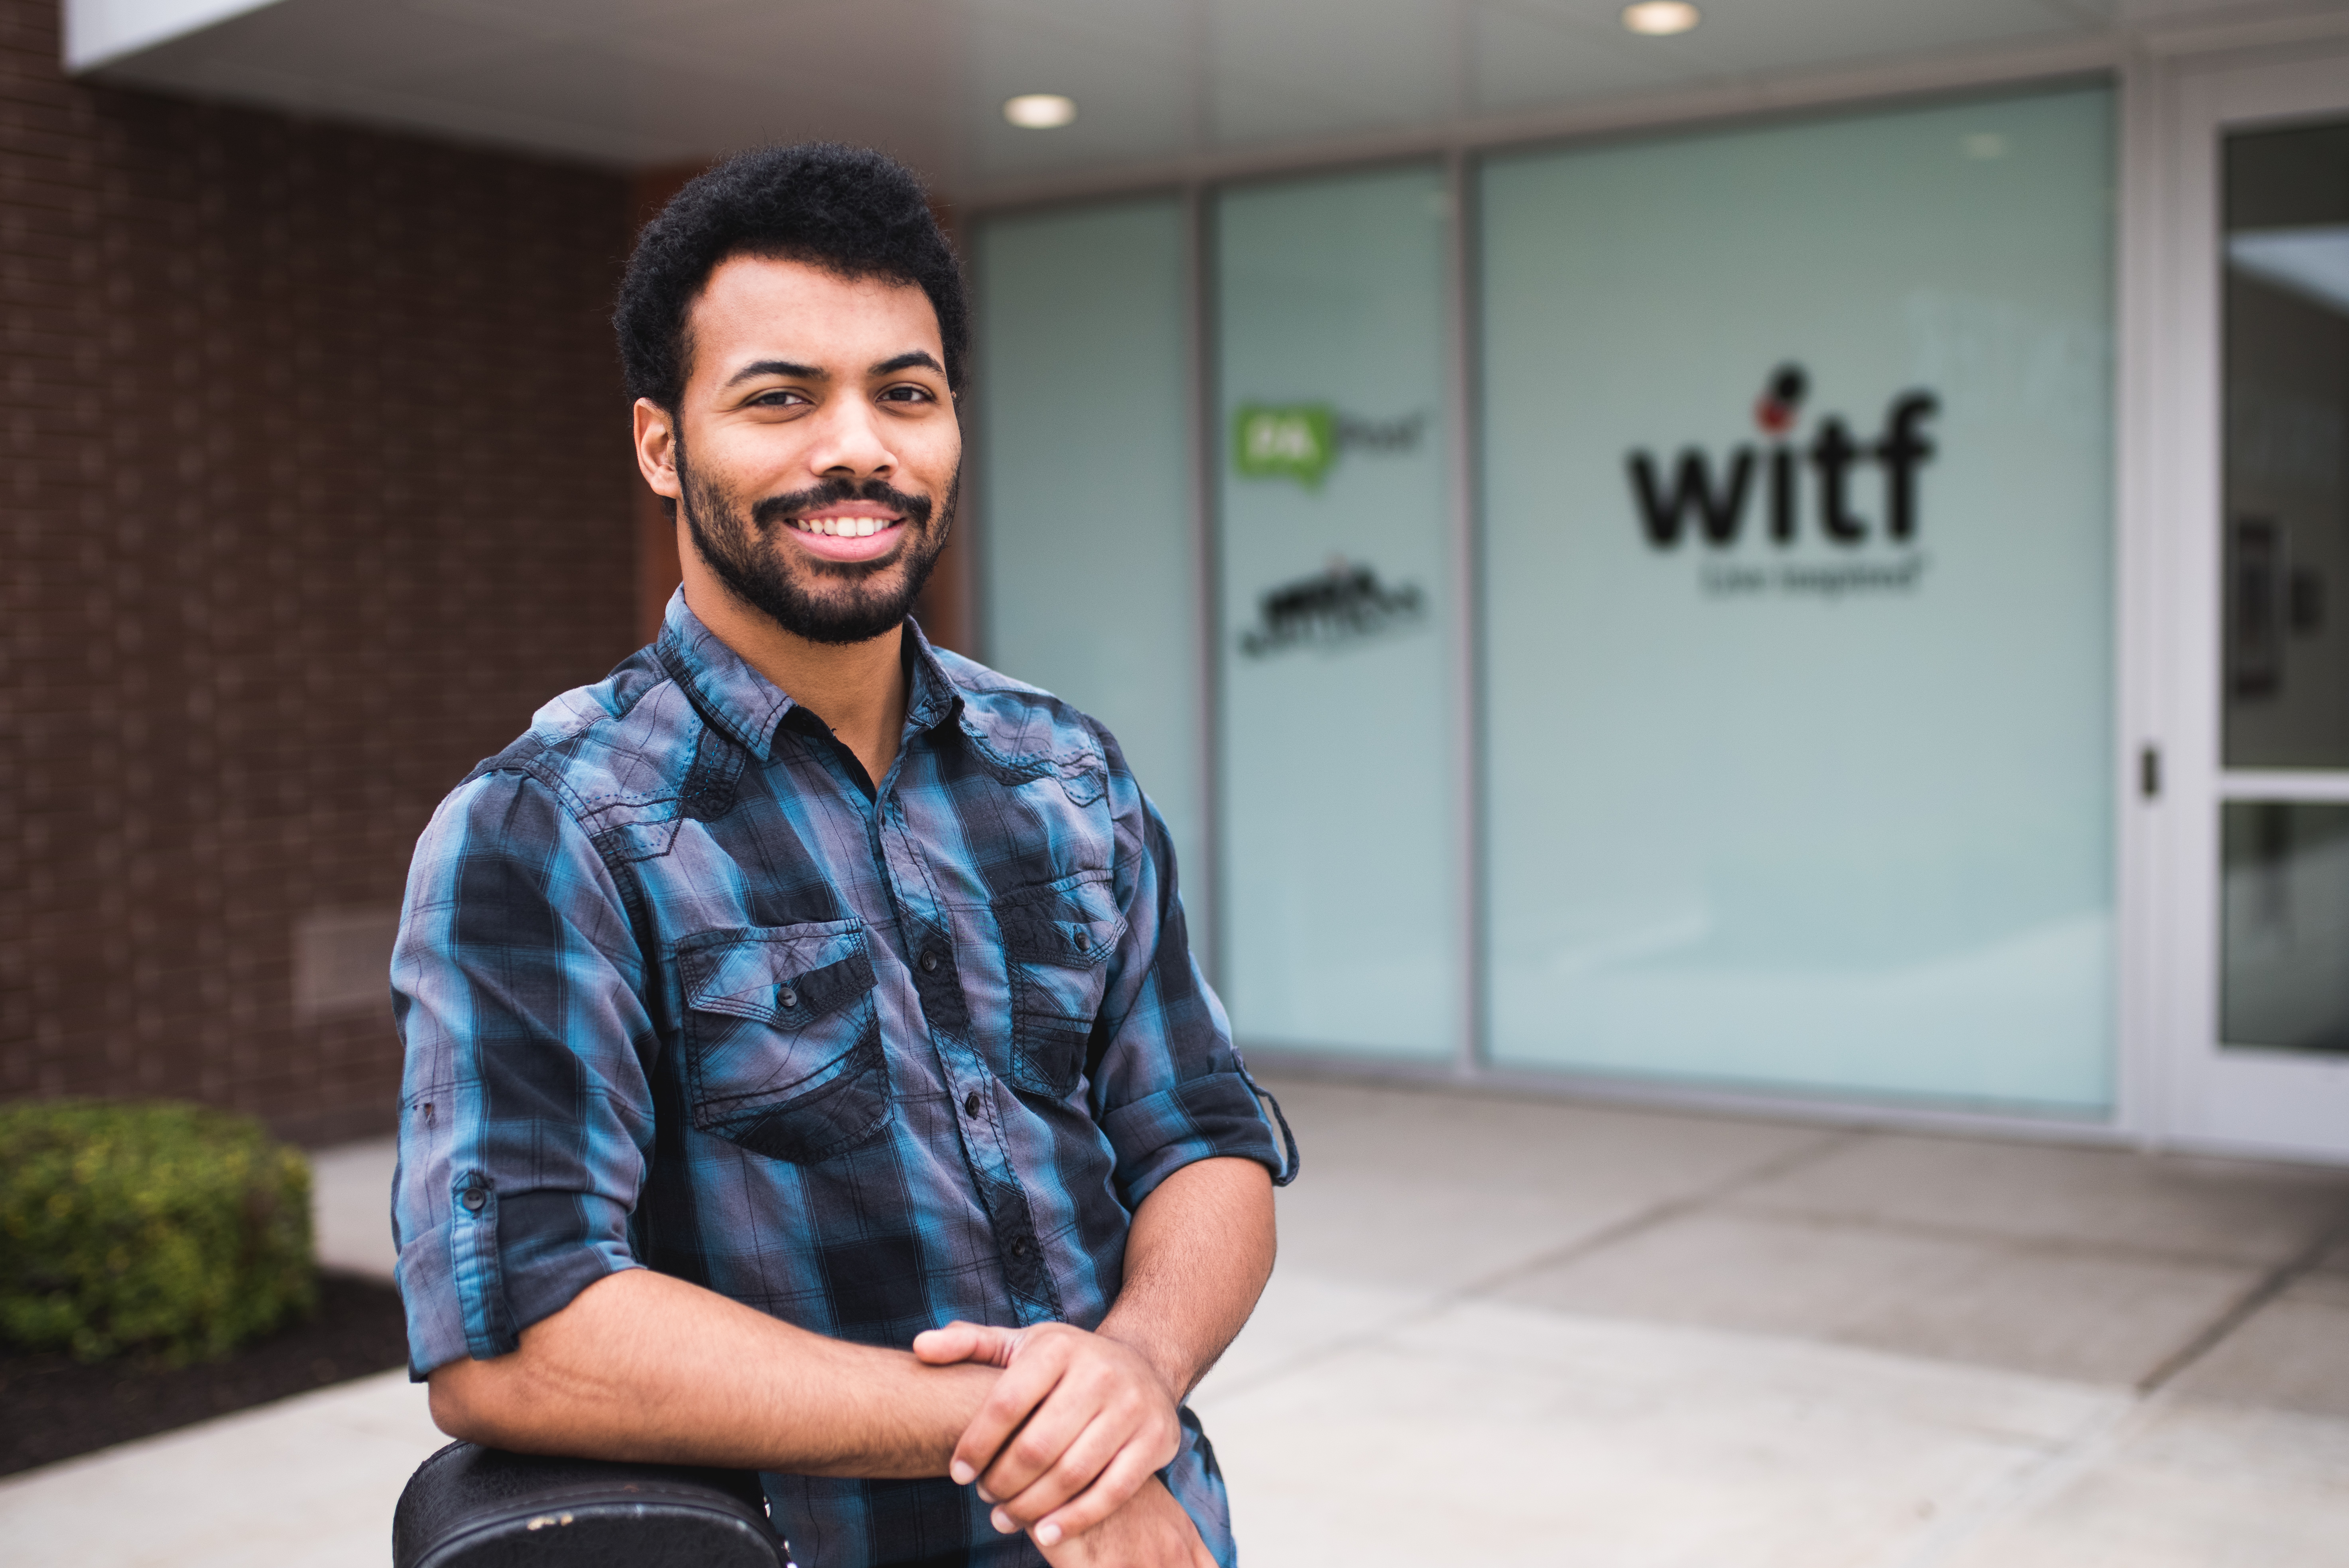 Eric Torres of Devix standing in front of the WITF building.